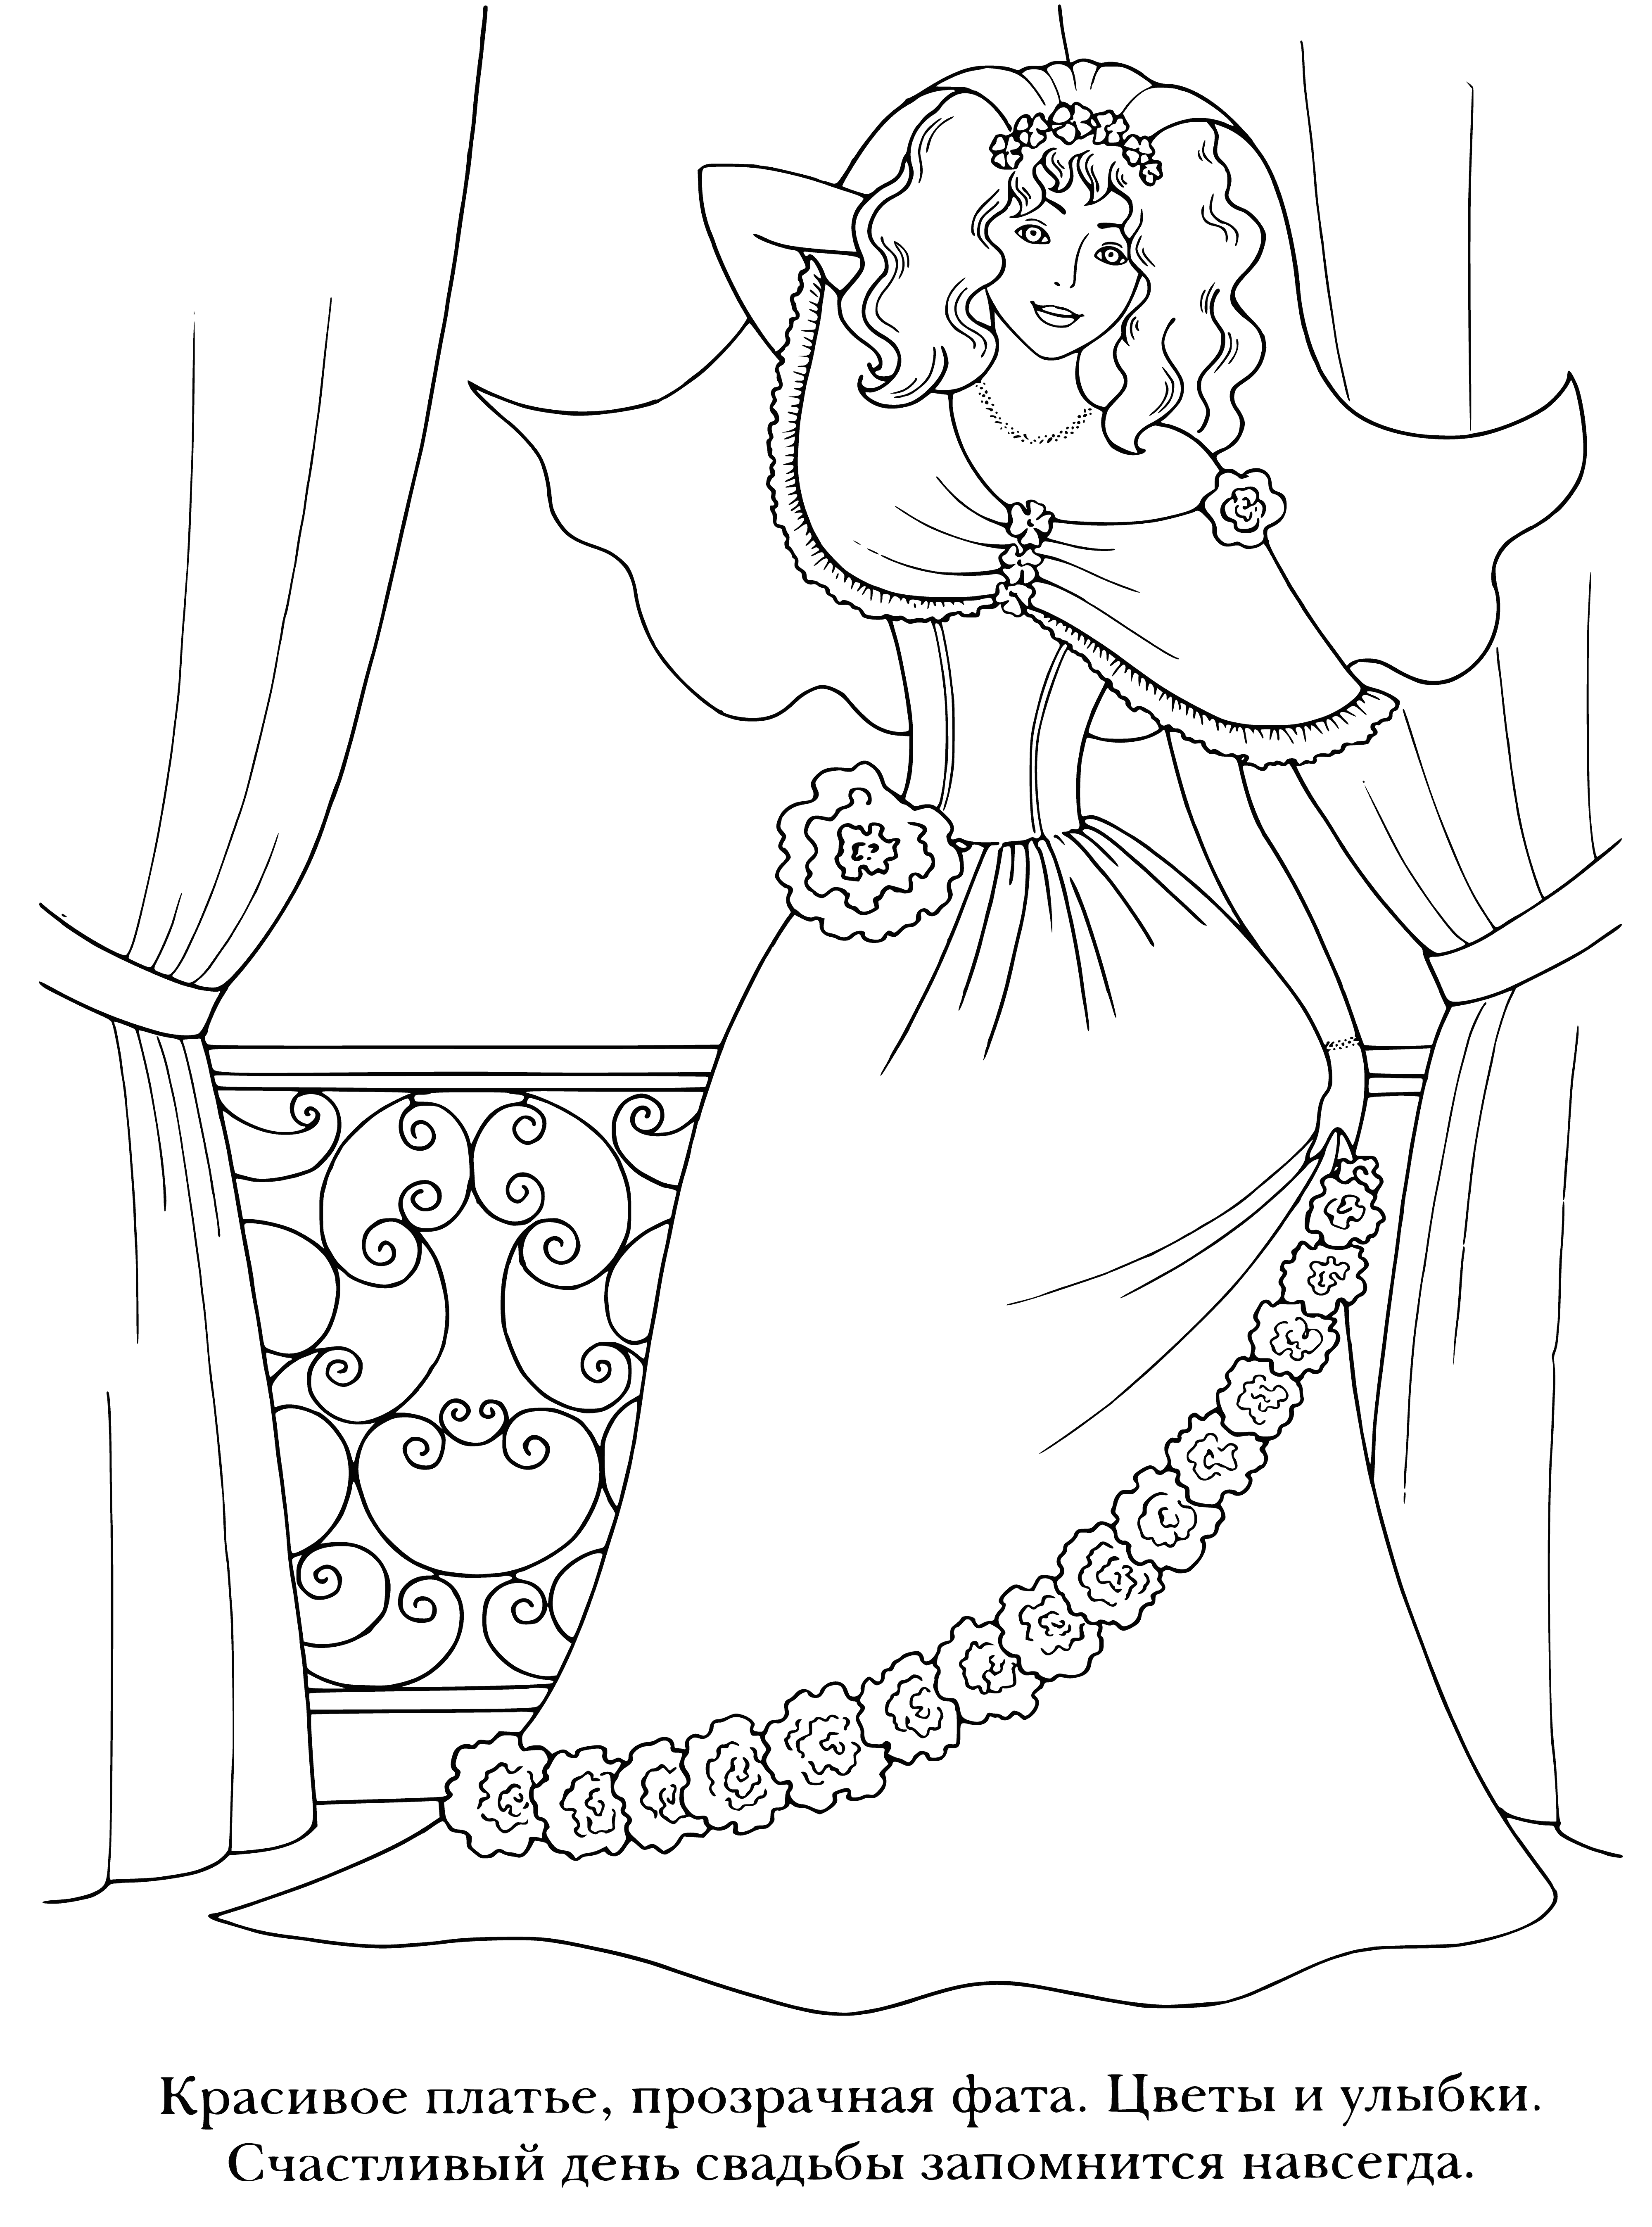 coloring page: Beautiful bride in a gown with a transparent veil and flowing hair happily walks down the aisle to marry.